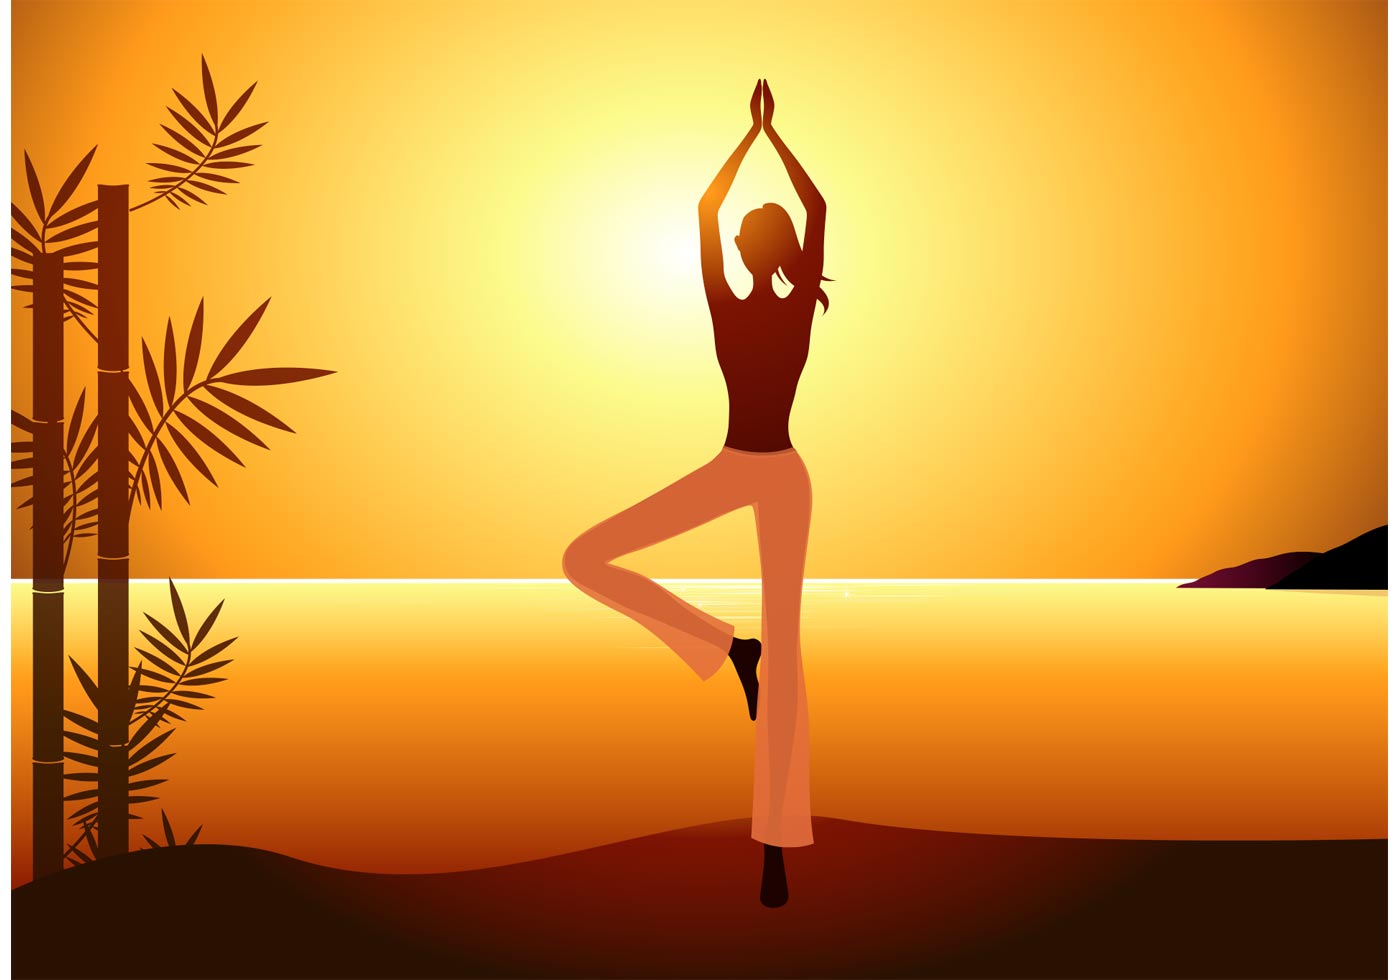 Free Vector Woman Practices Yoga On Sunset - Download Free ...